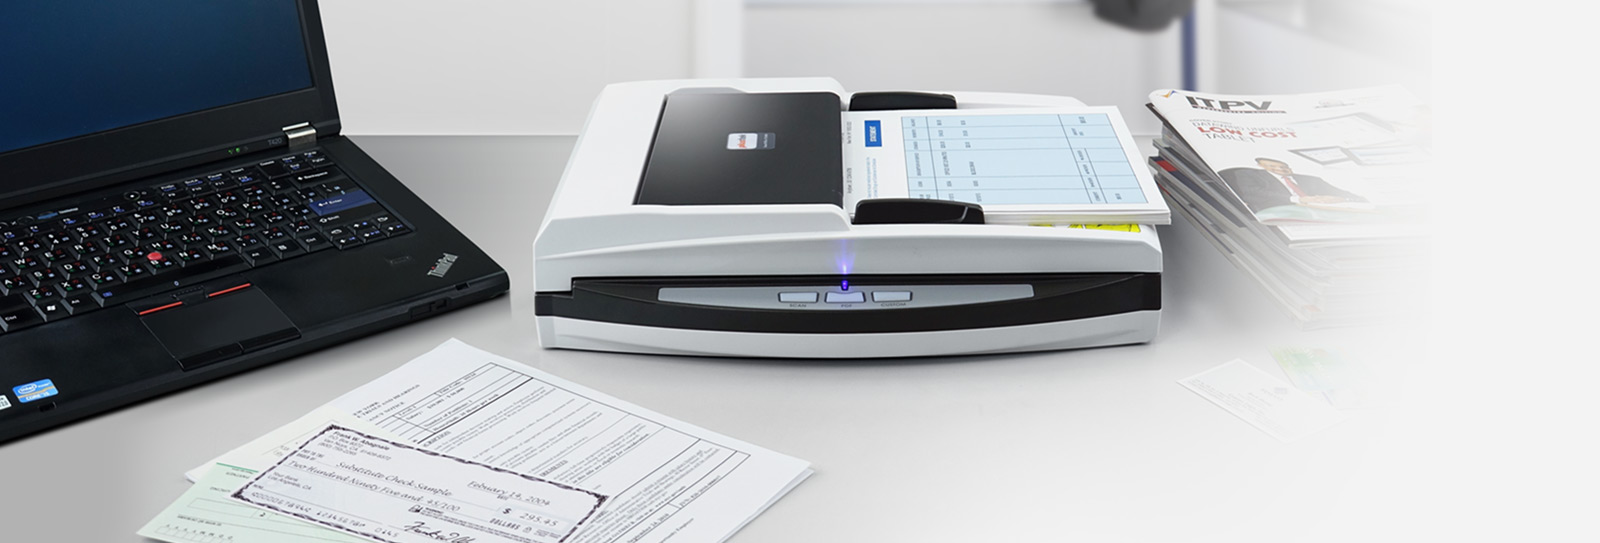 plustek offers this scanner for office who need to scan with fragile and unbreakable document, also want to have automatic document feeder capability